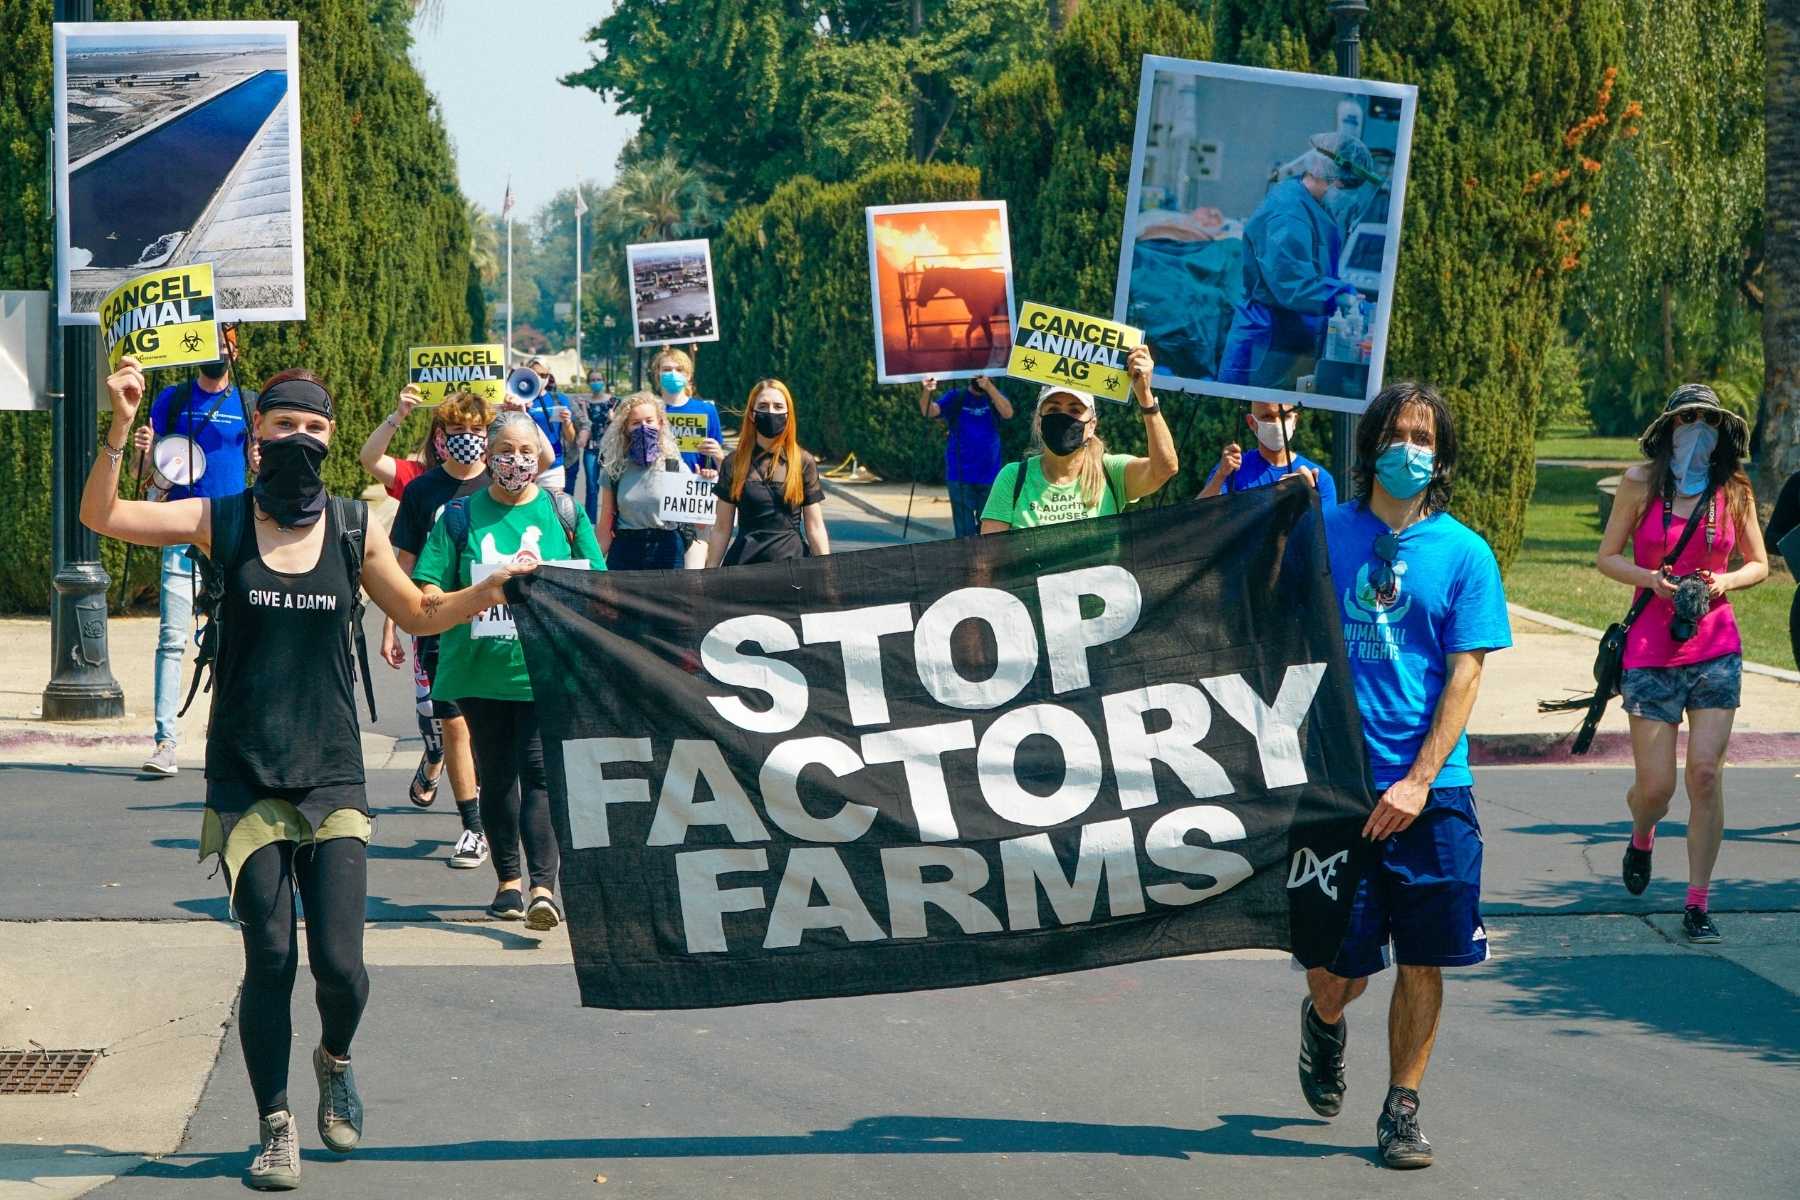 Demonstration: Stop Factory Farms